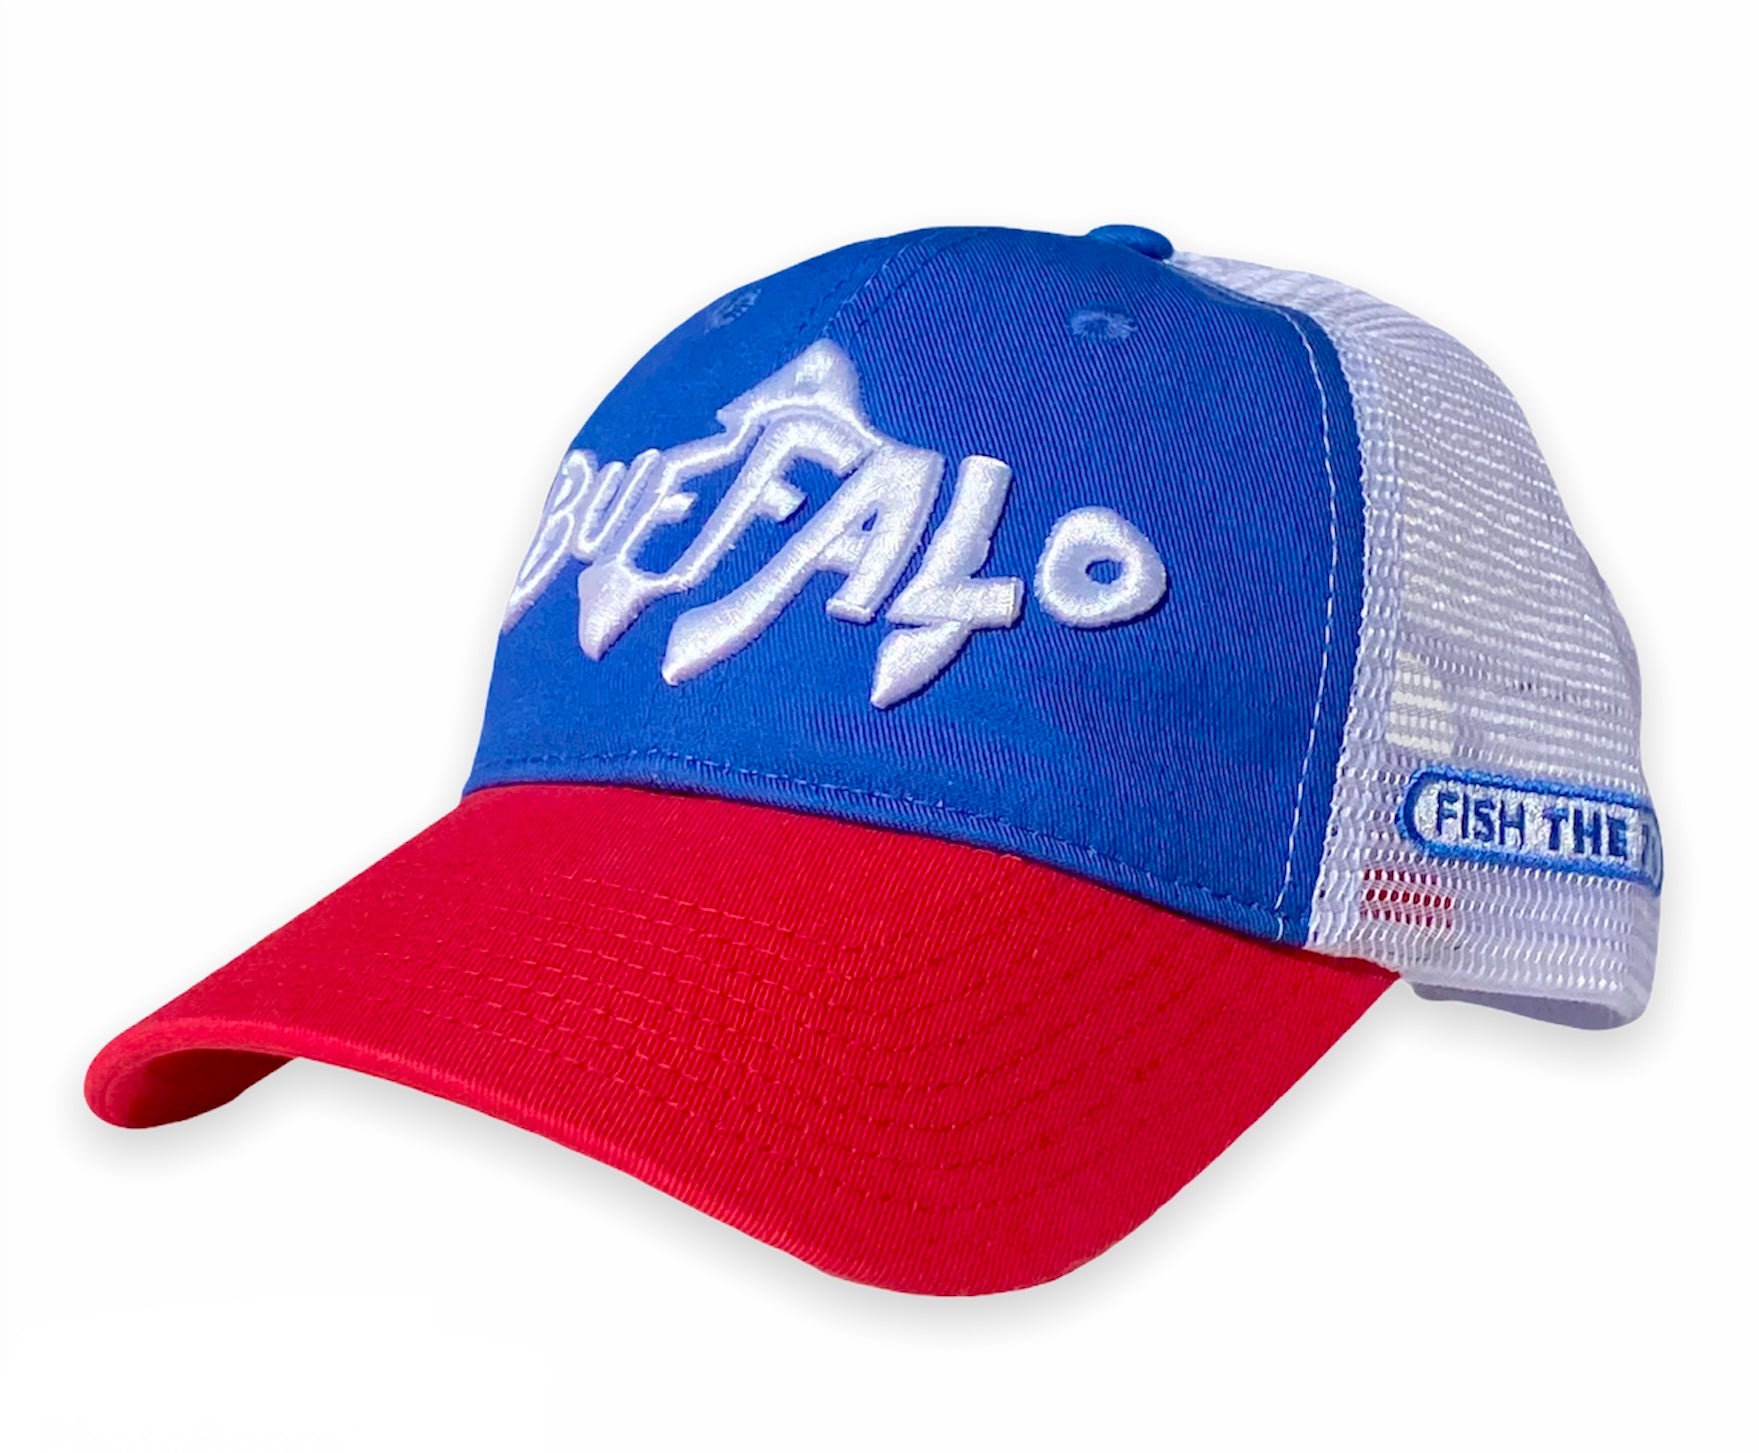 Buffalo Fish - Unstructured trucker hat - Red / Blue / White – Fish Local